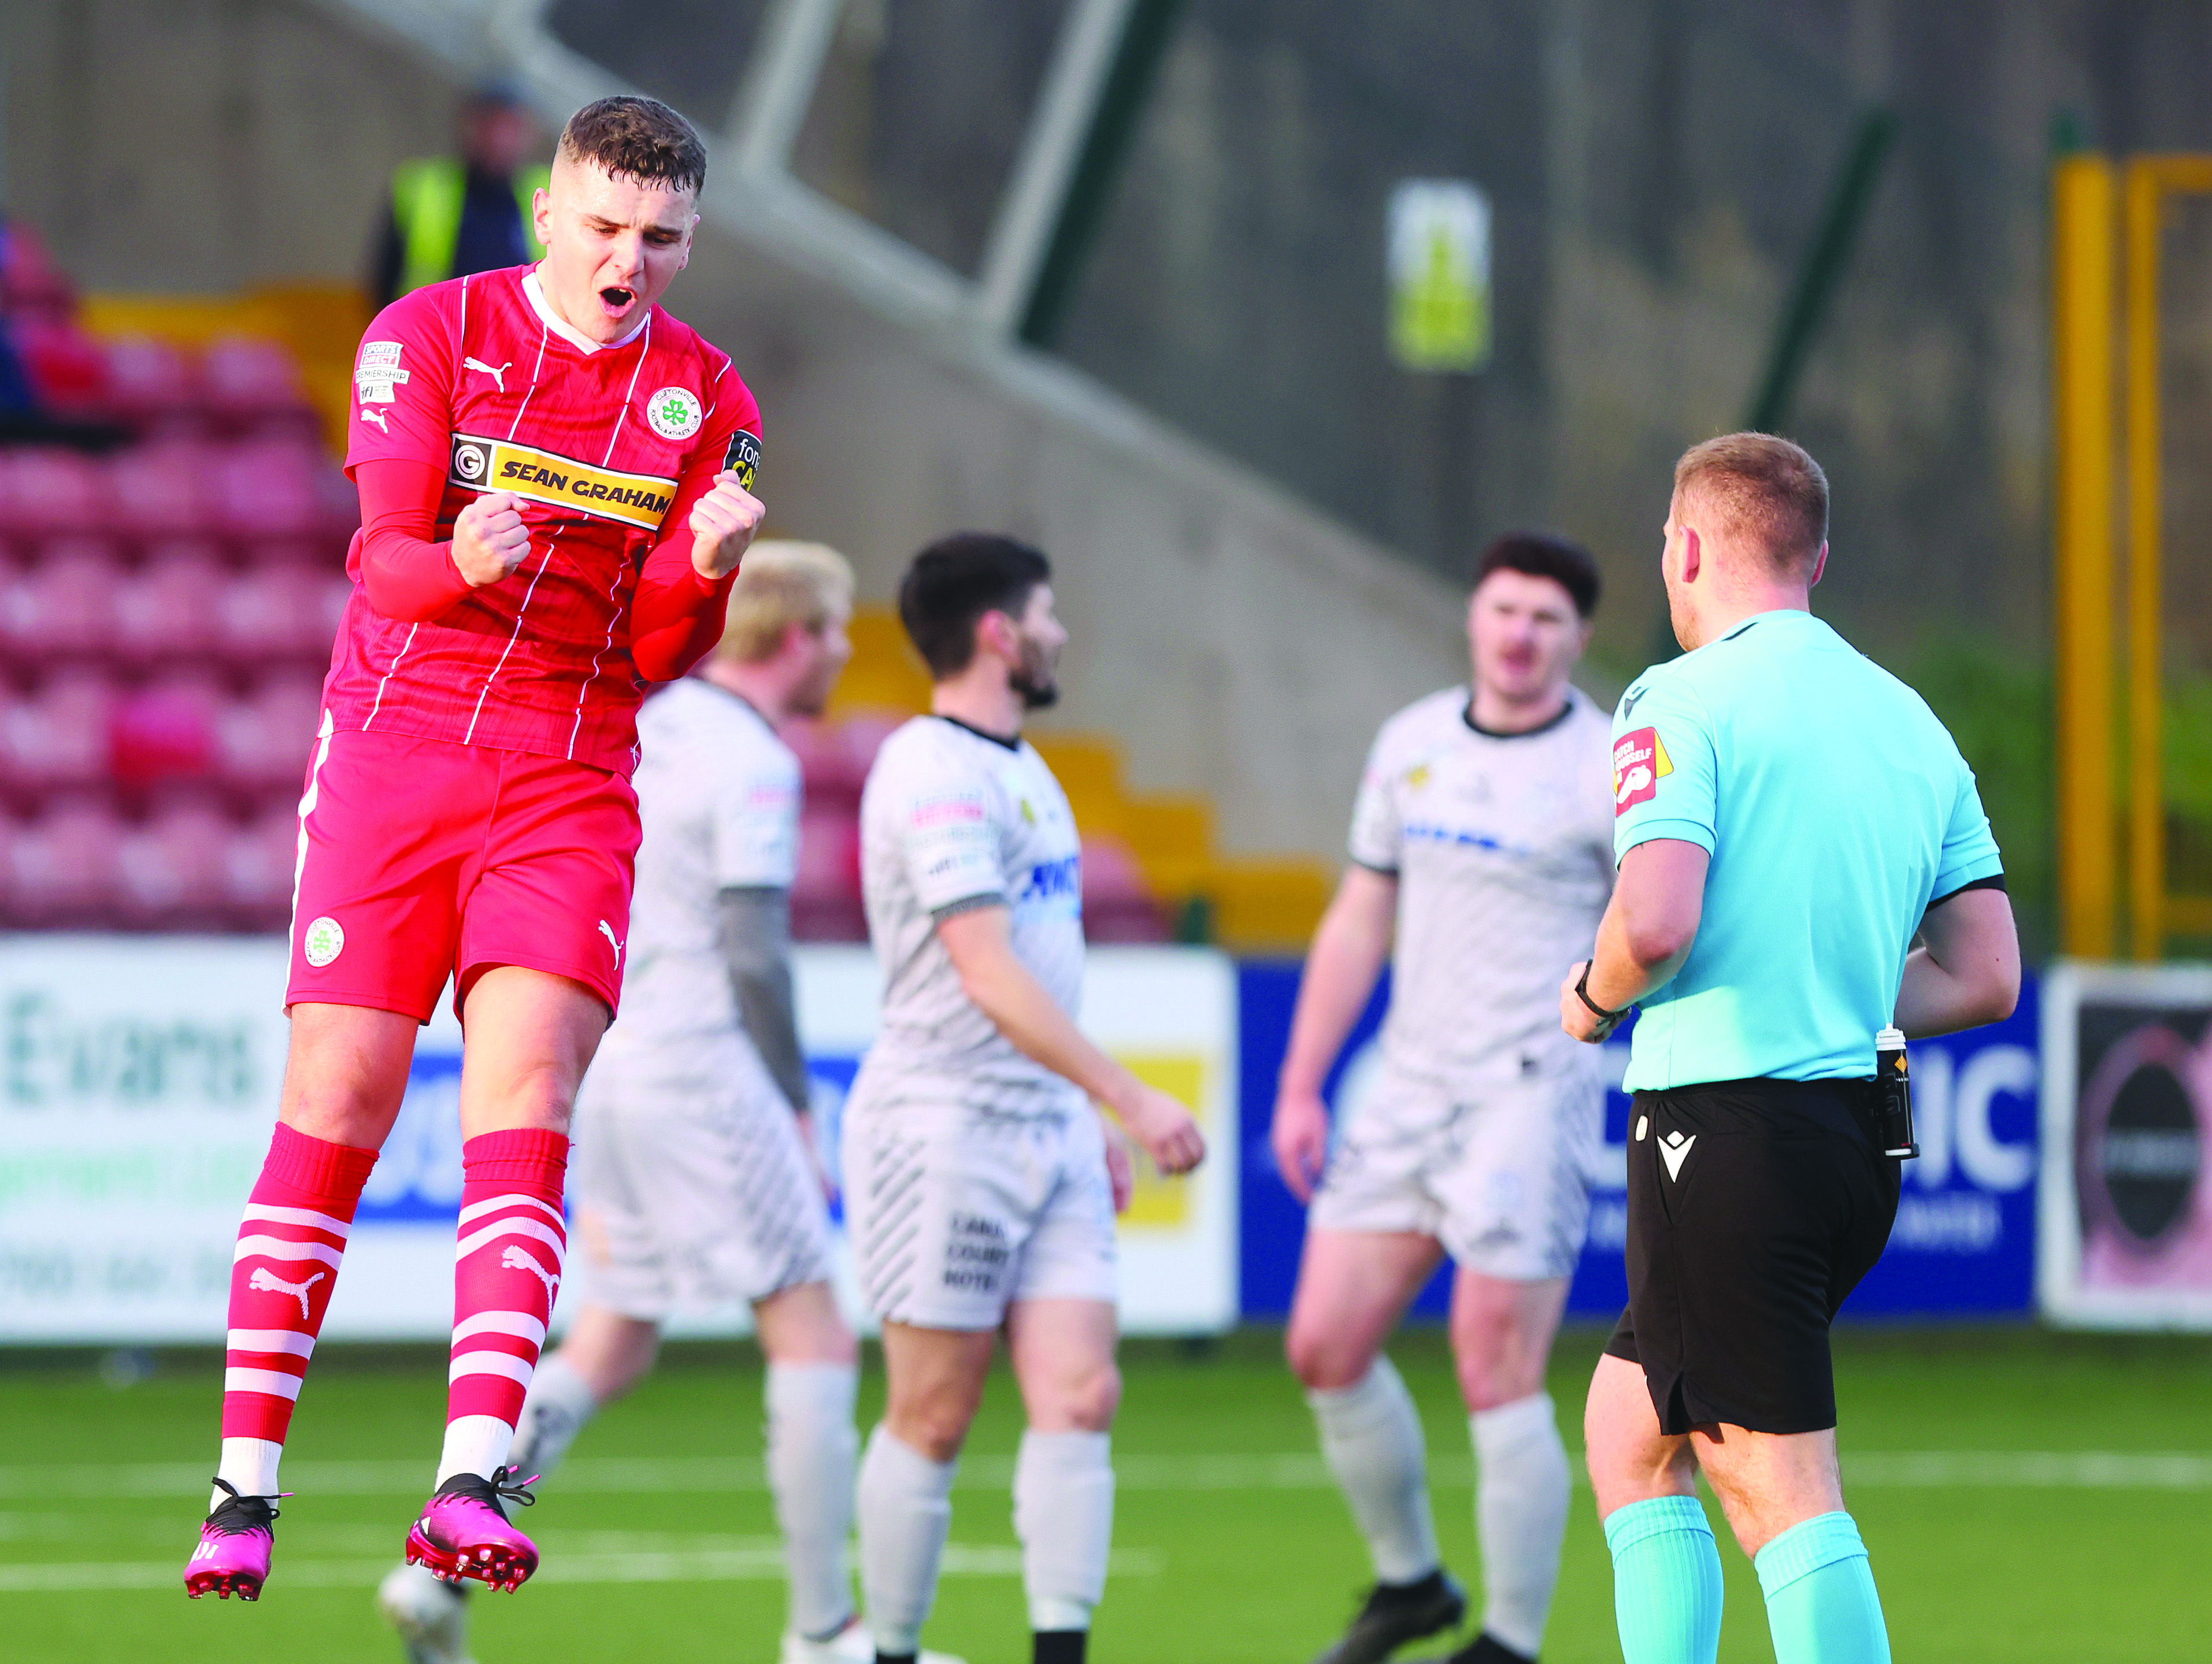 Ronan Hale celebrates his goal against Newry at the weekend and his return is a major boost for the Reds, according to manager Jim Magilton